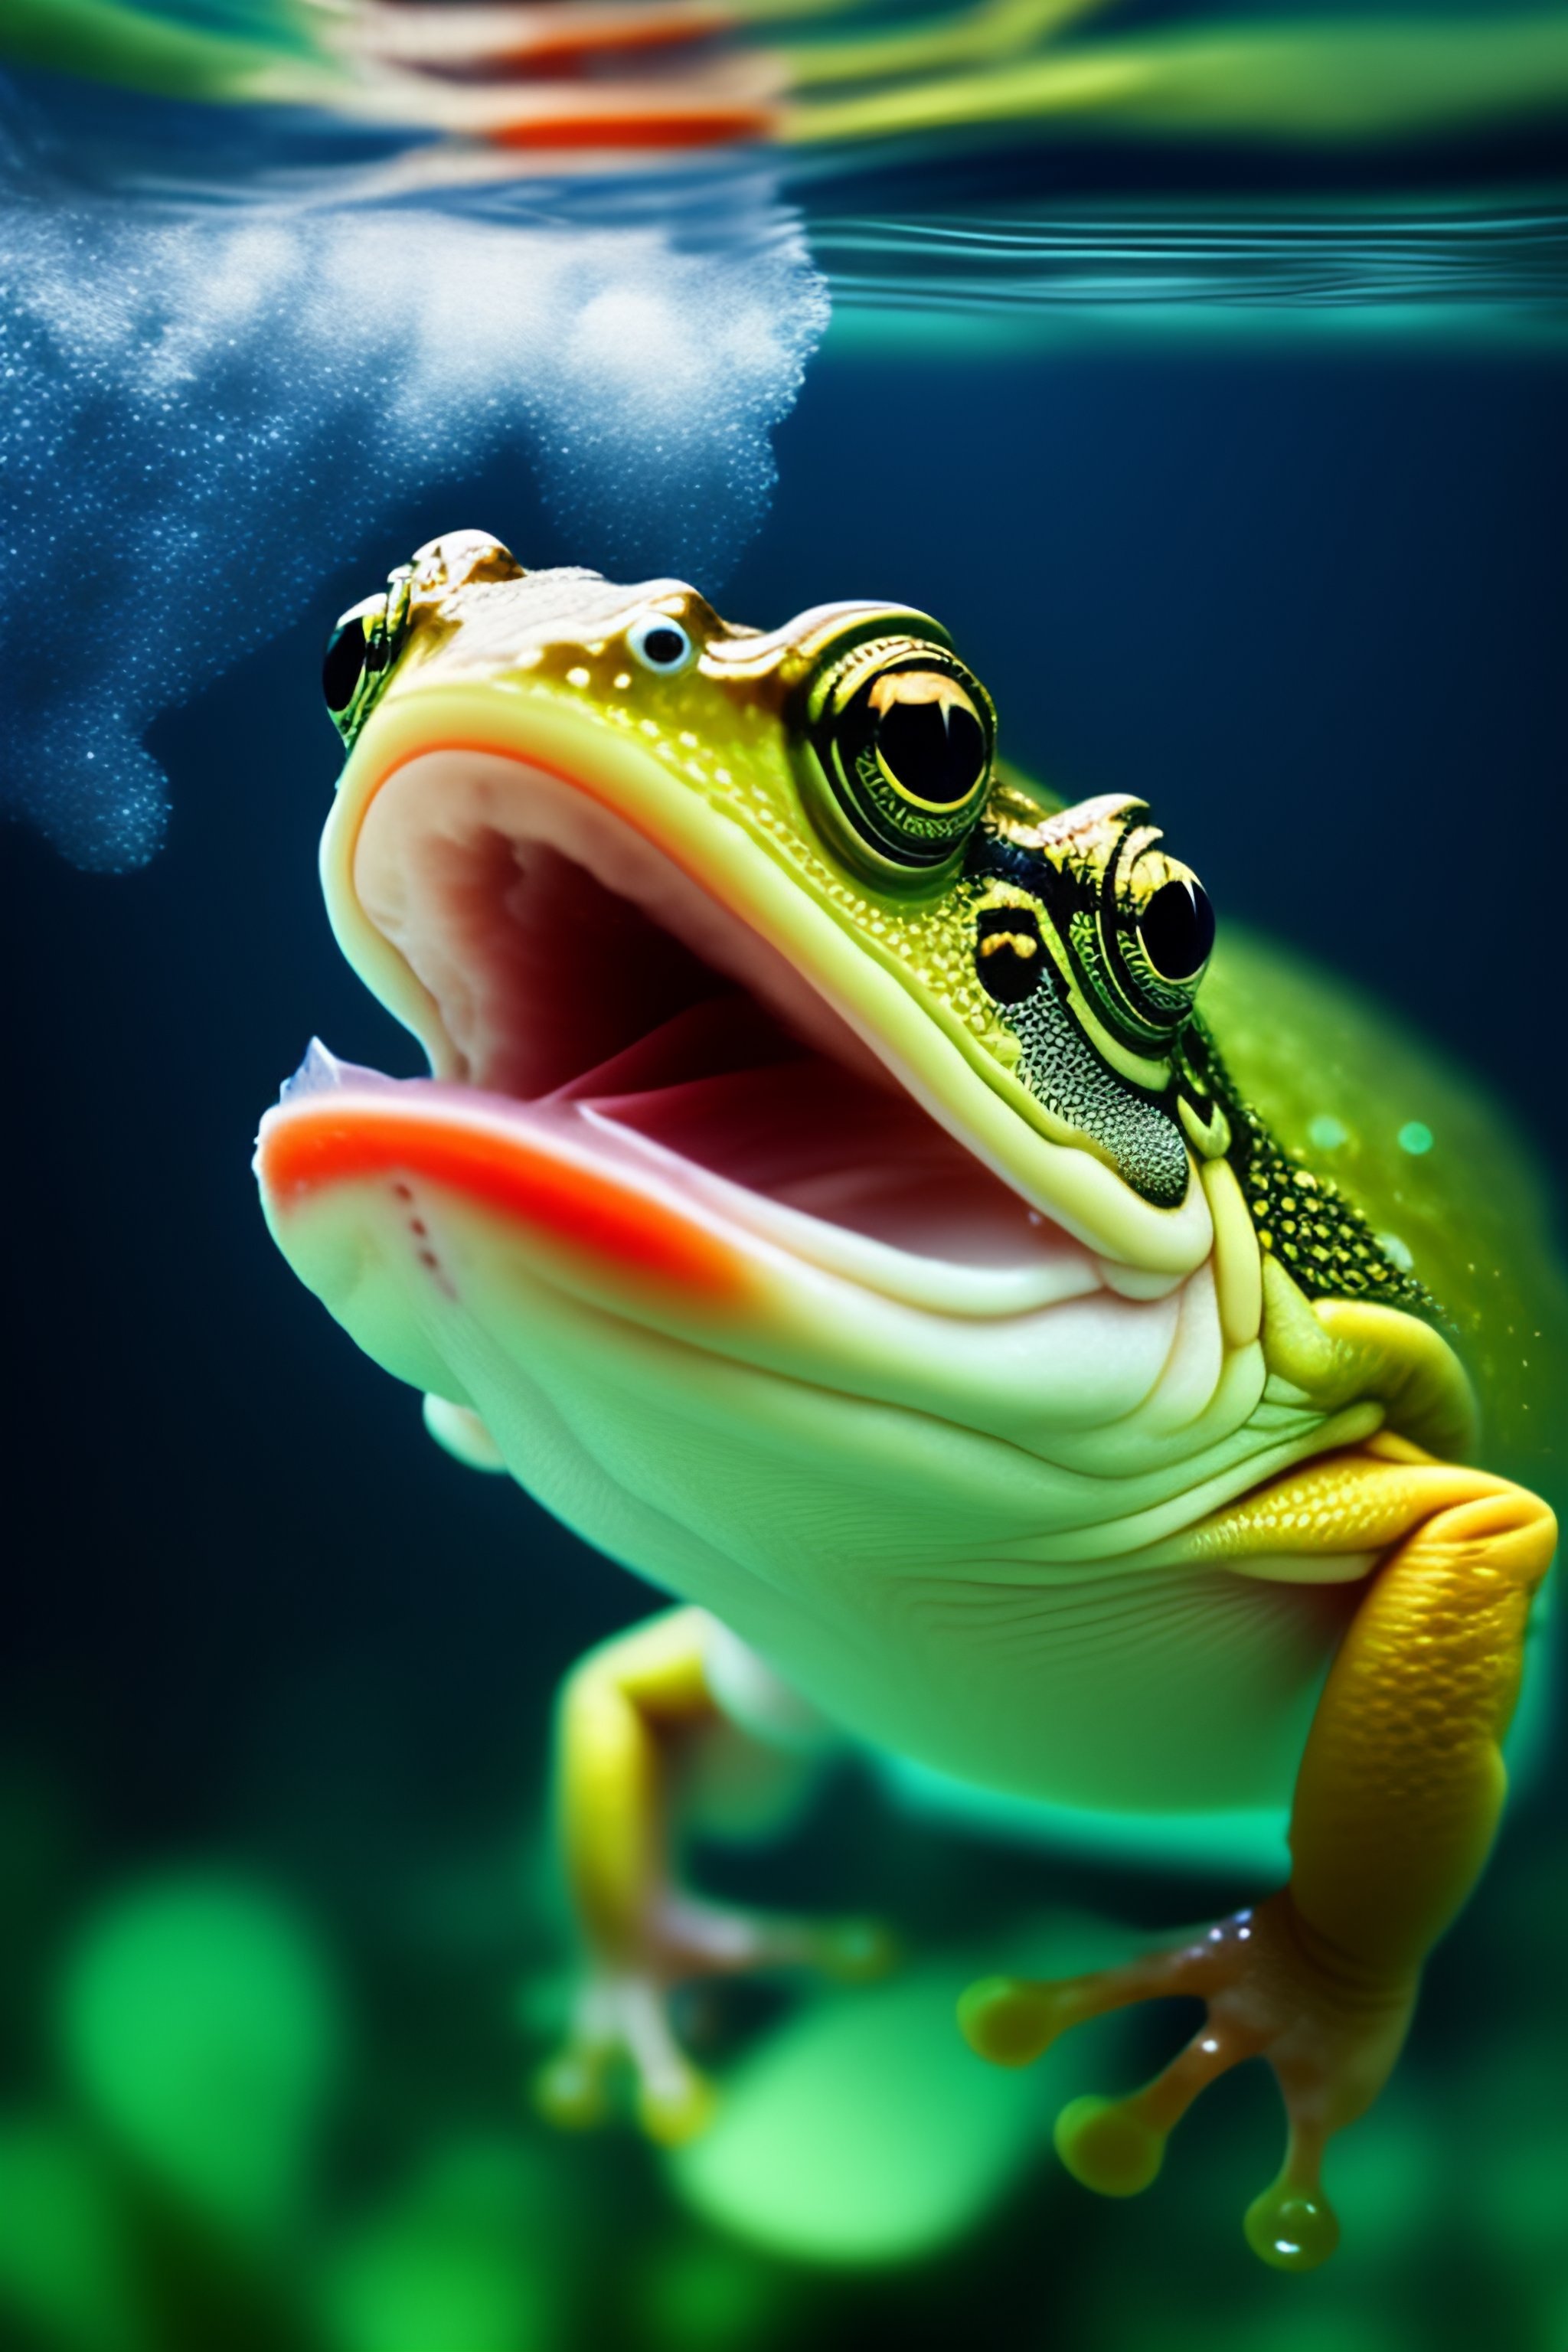 Lexica - Frog underwater eating a fish